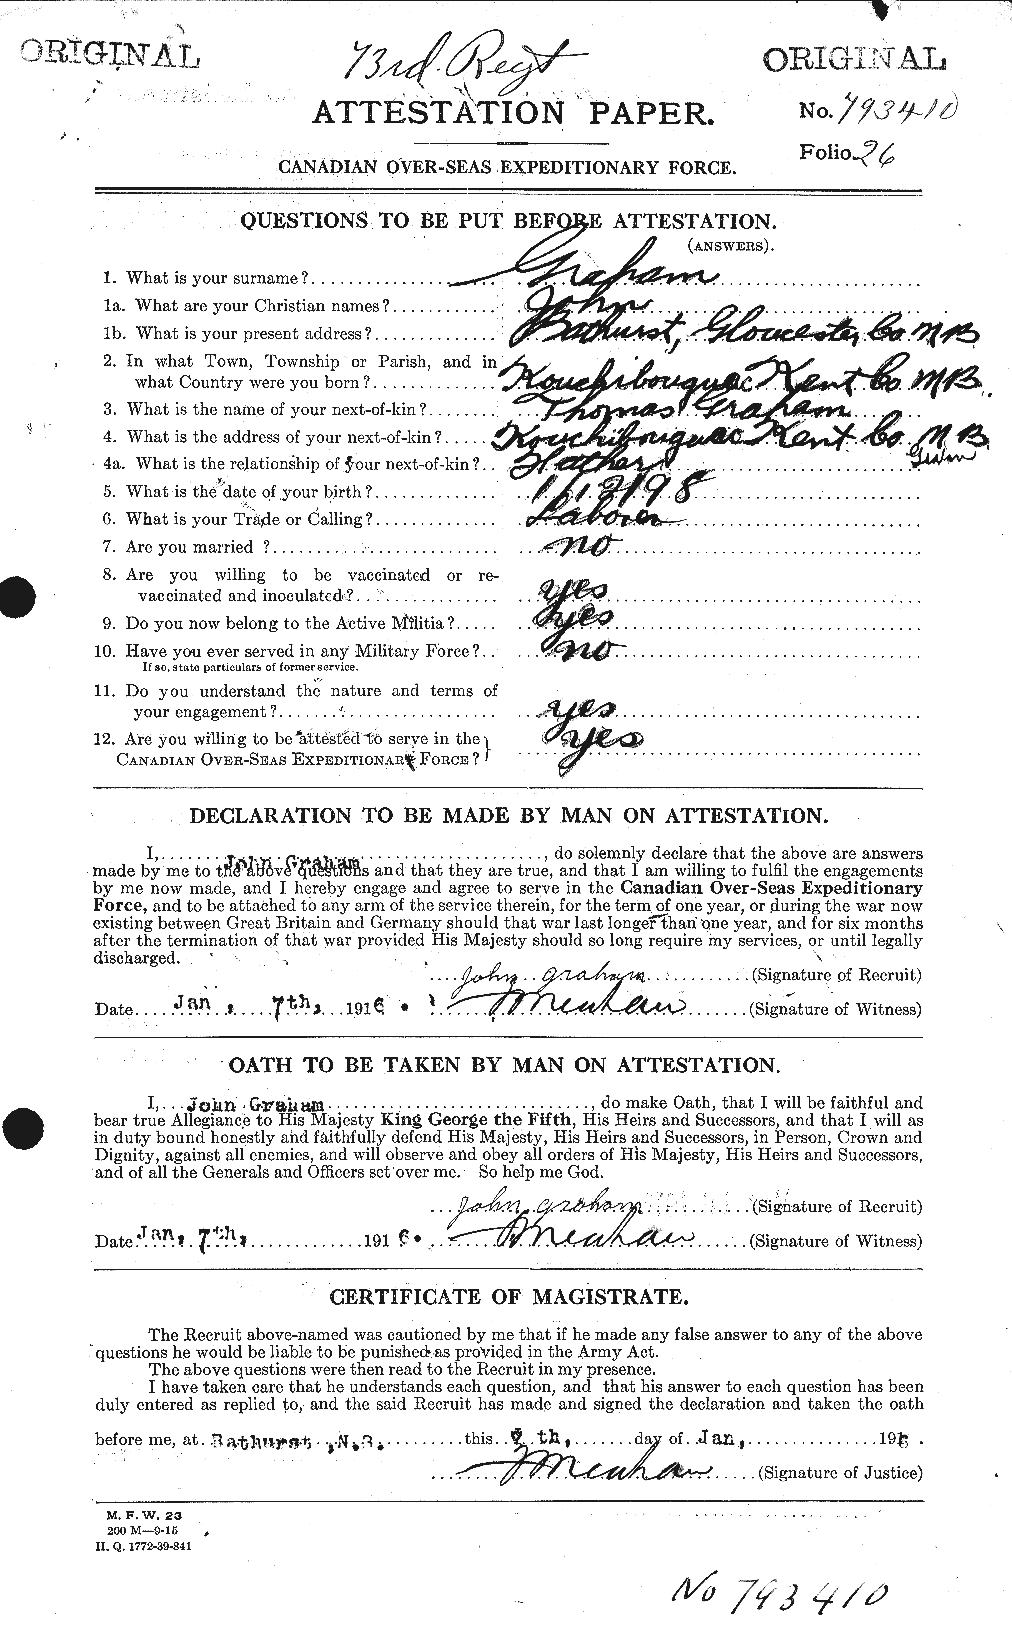 Personnel Records of the First World War - CEF 359136a